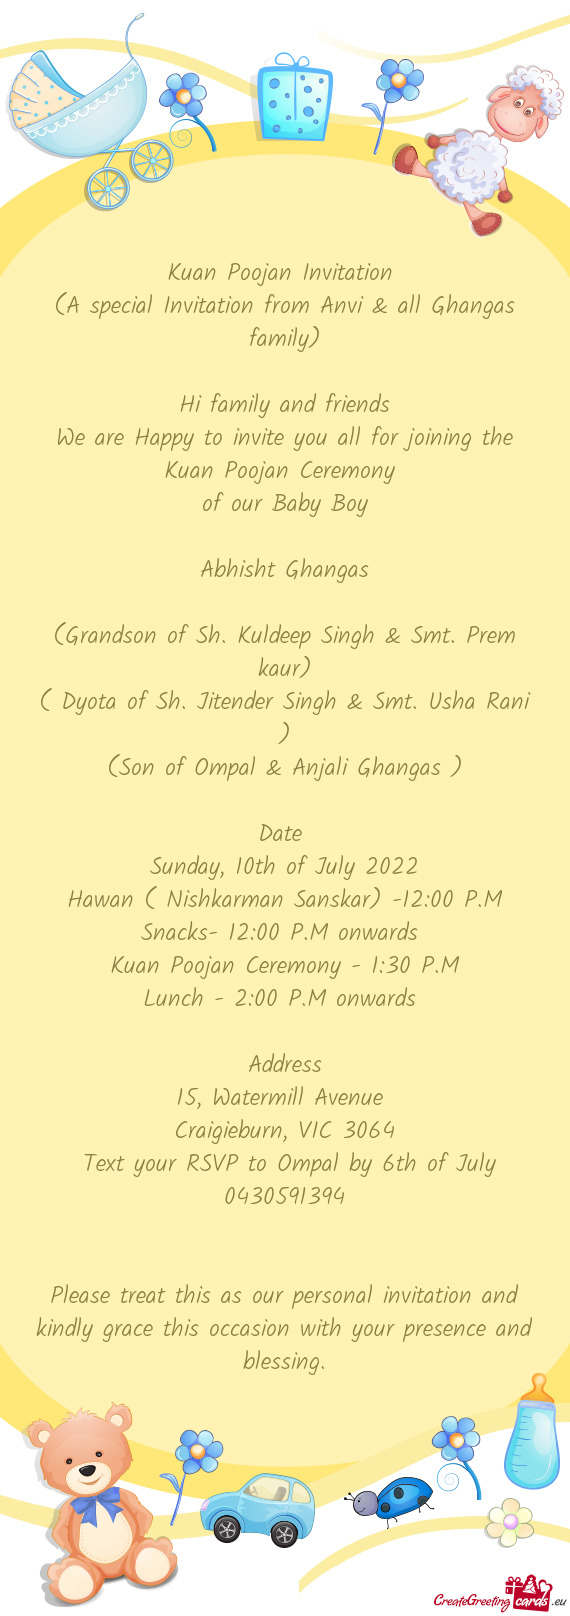 (A special Invitation from Anvi & all Ghangas family)